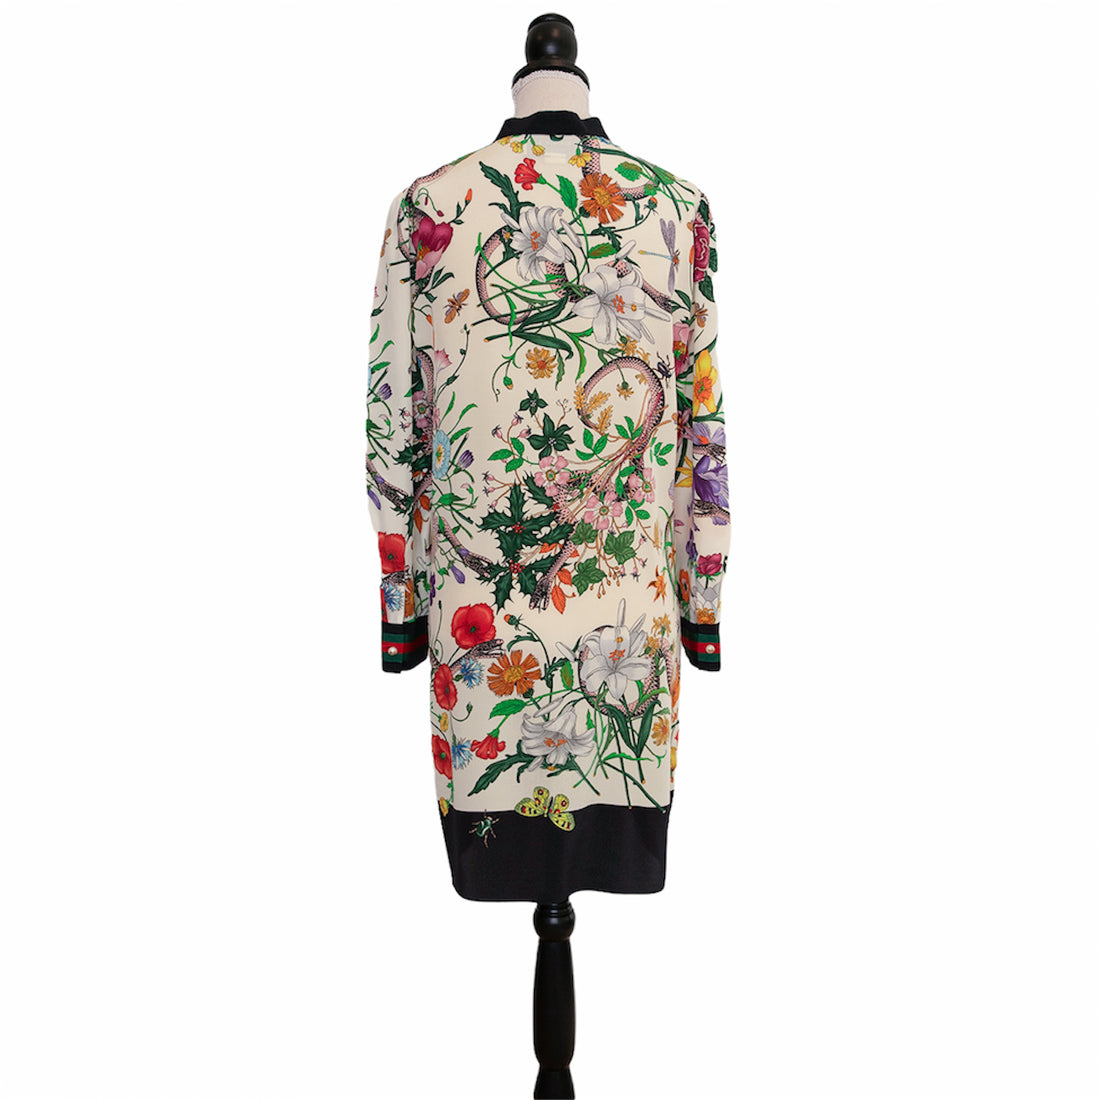 Gucci mini dress with floral pattern and ruffle trim